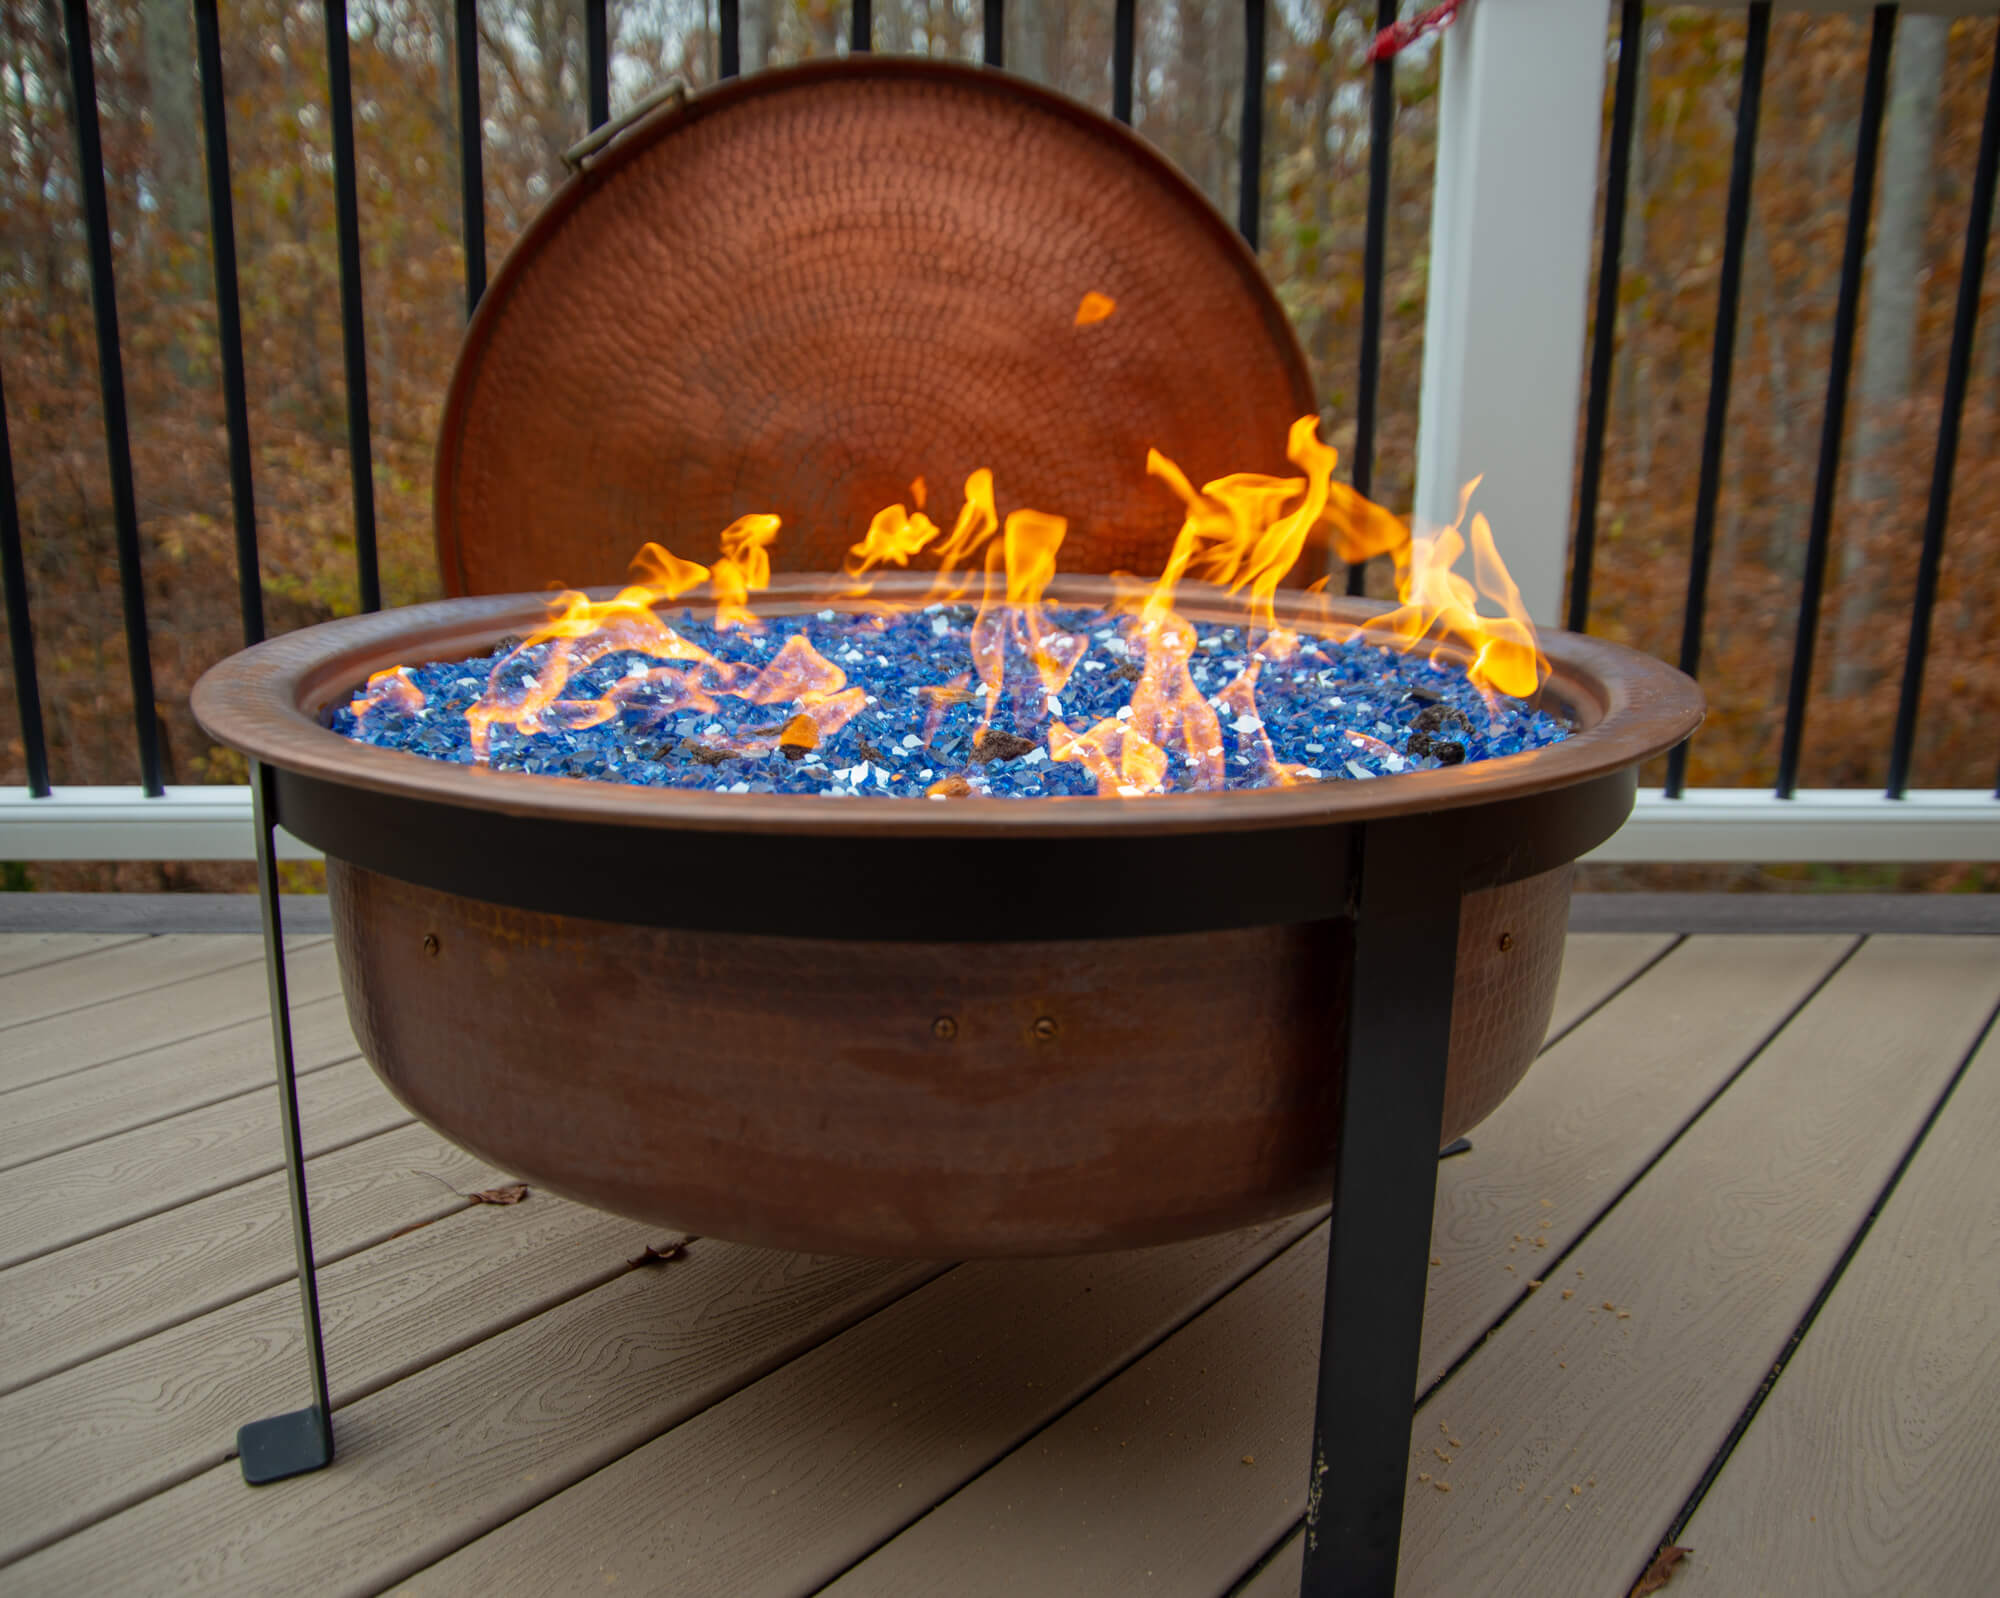 6 Ways To Put A Fire Pit On Wooden Deck, Can I Put A Gas Fire Pit On My Deck